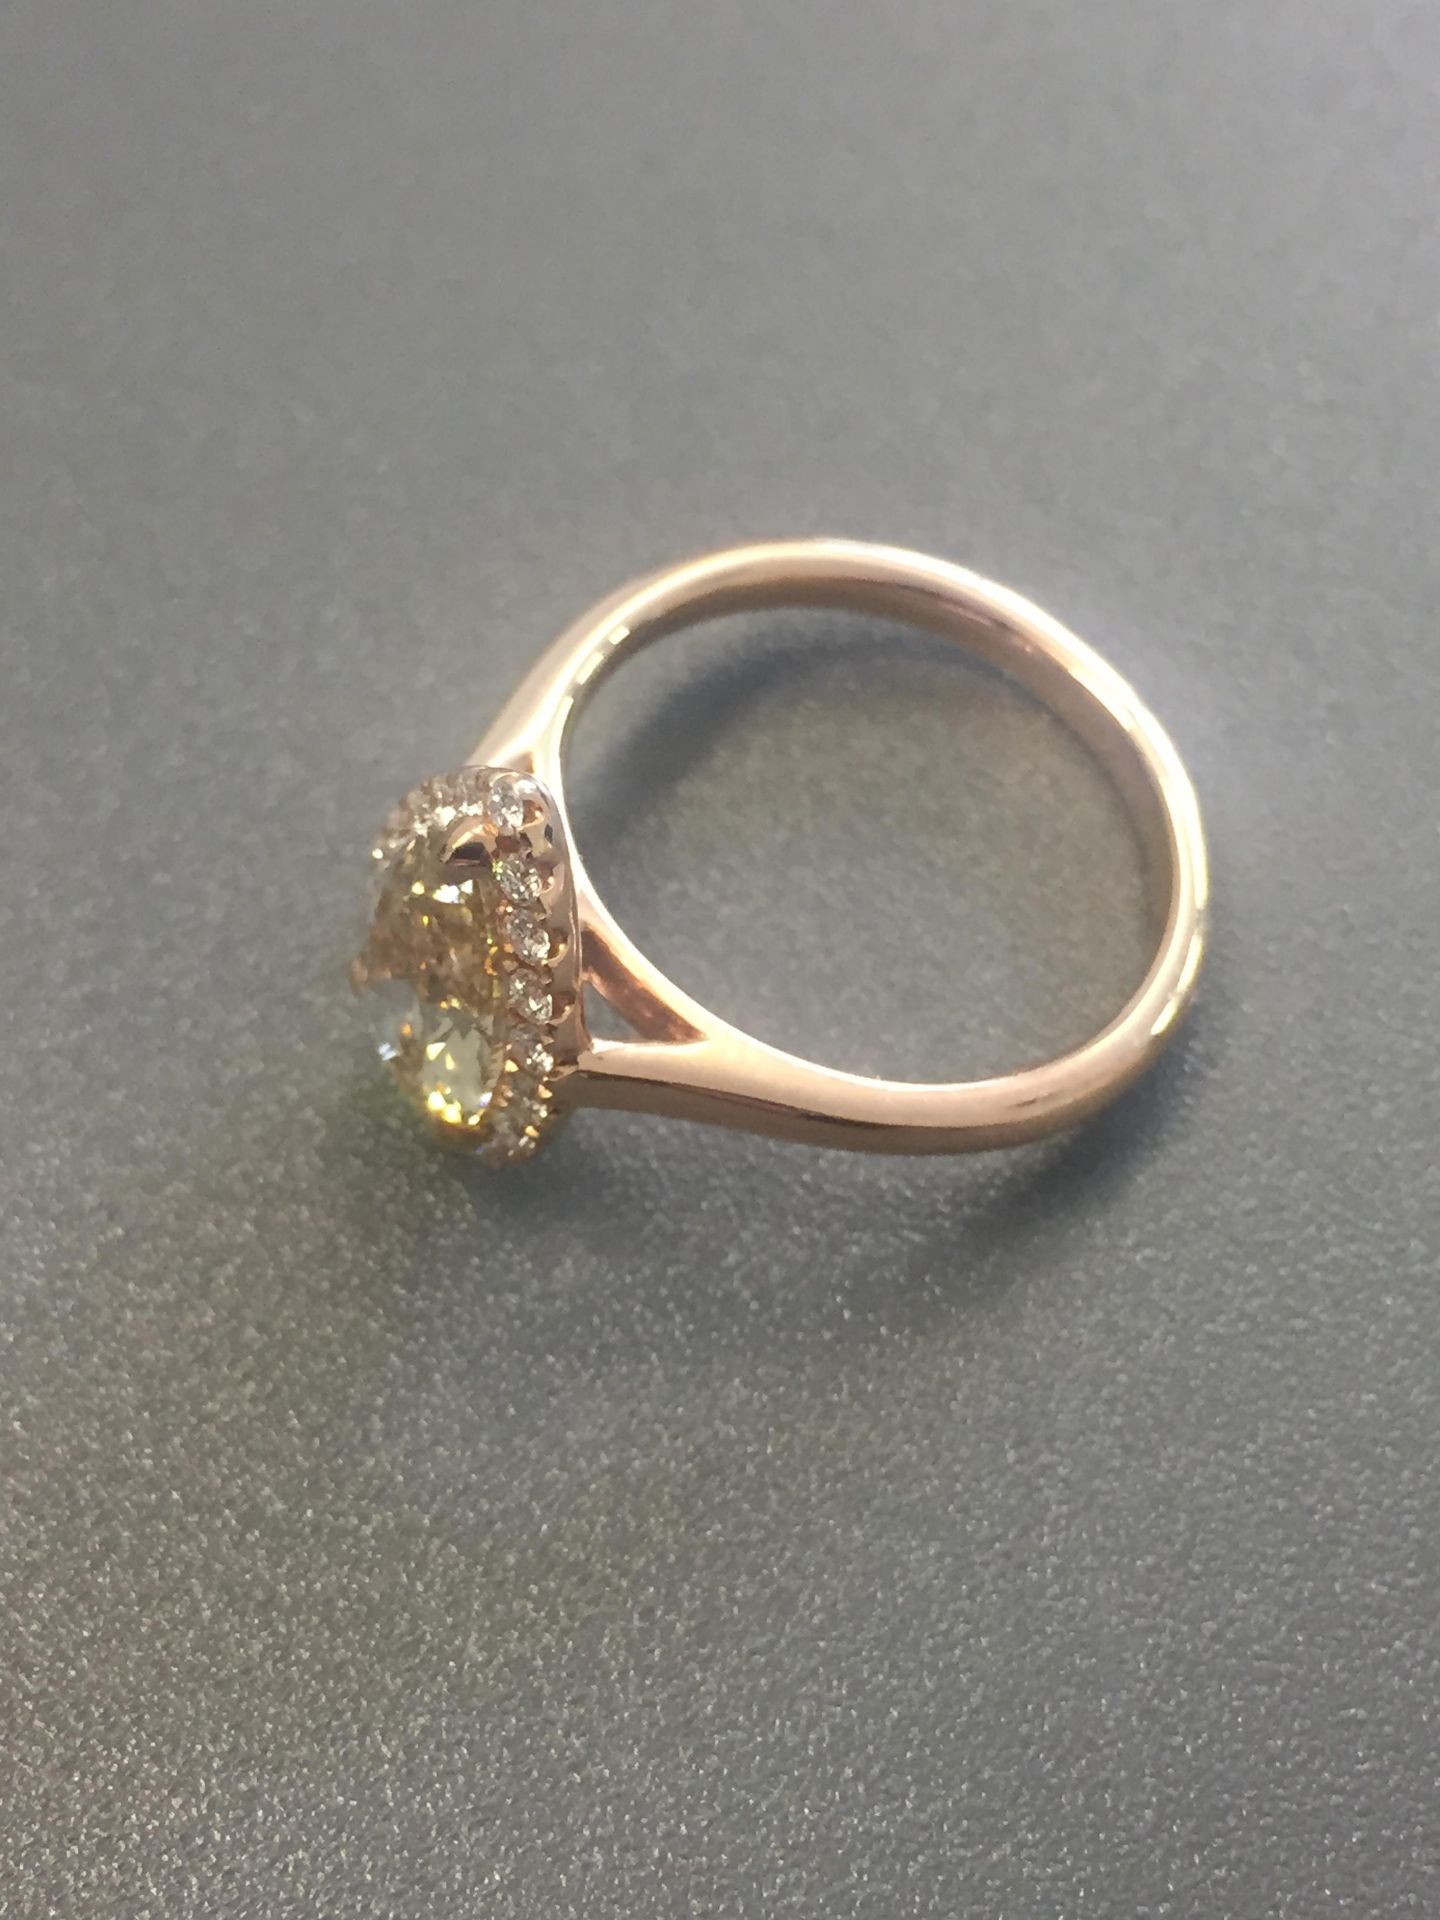 1.47ct pear shaped diamond set ring. Fancy yellow pear diamond, I1 clarity. Set in 18ct rose gold. - Image 4 of 6